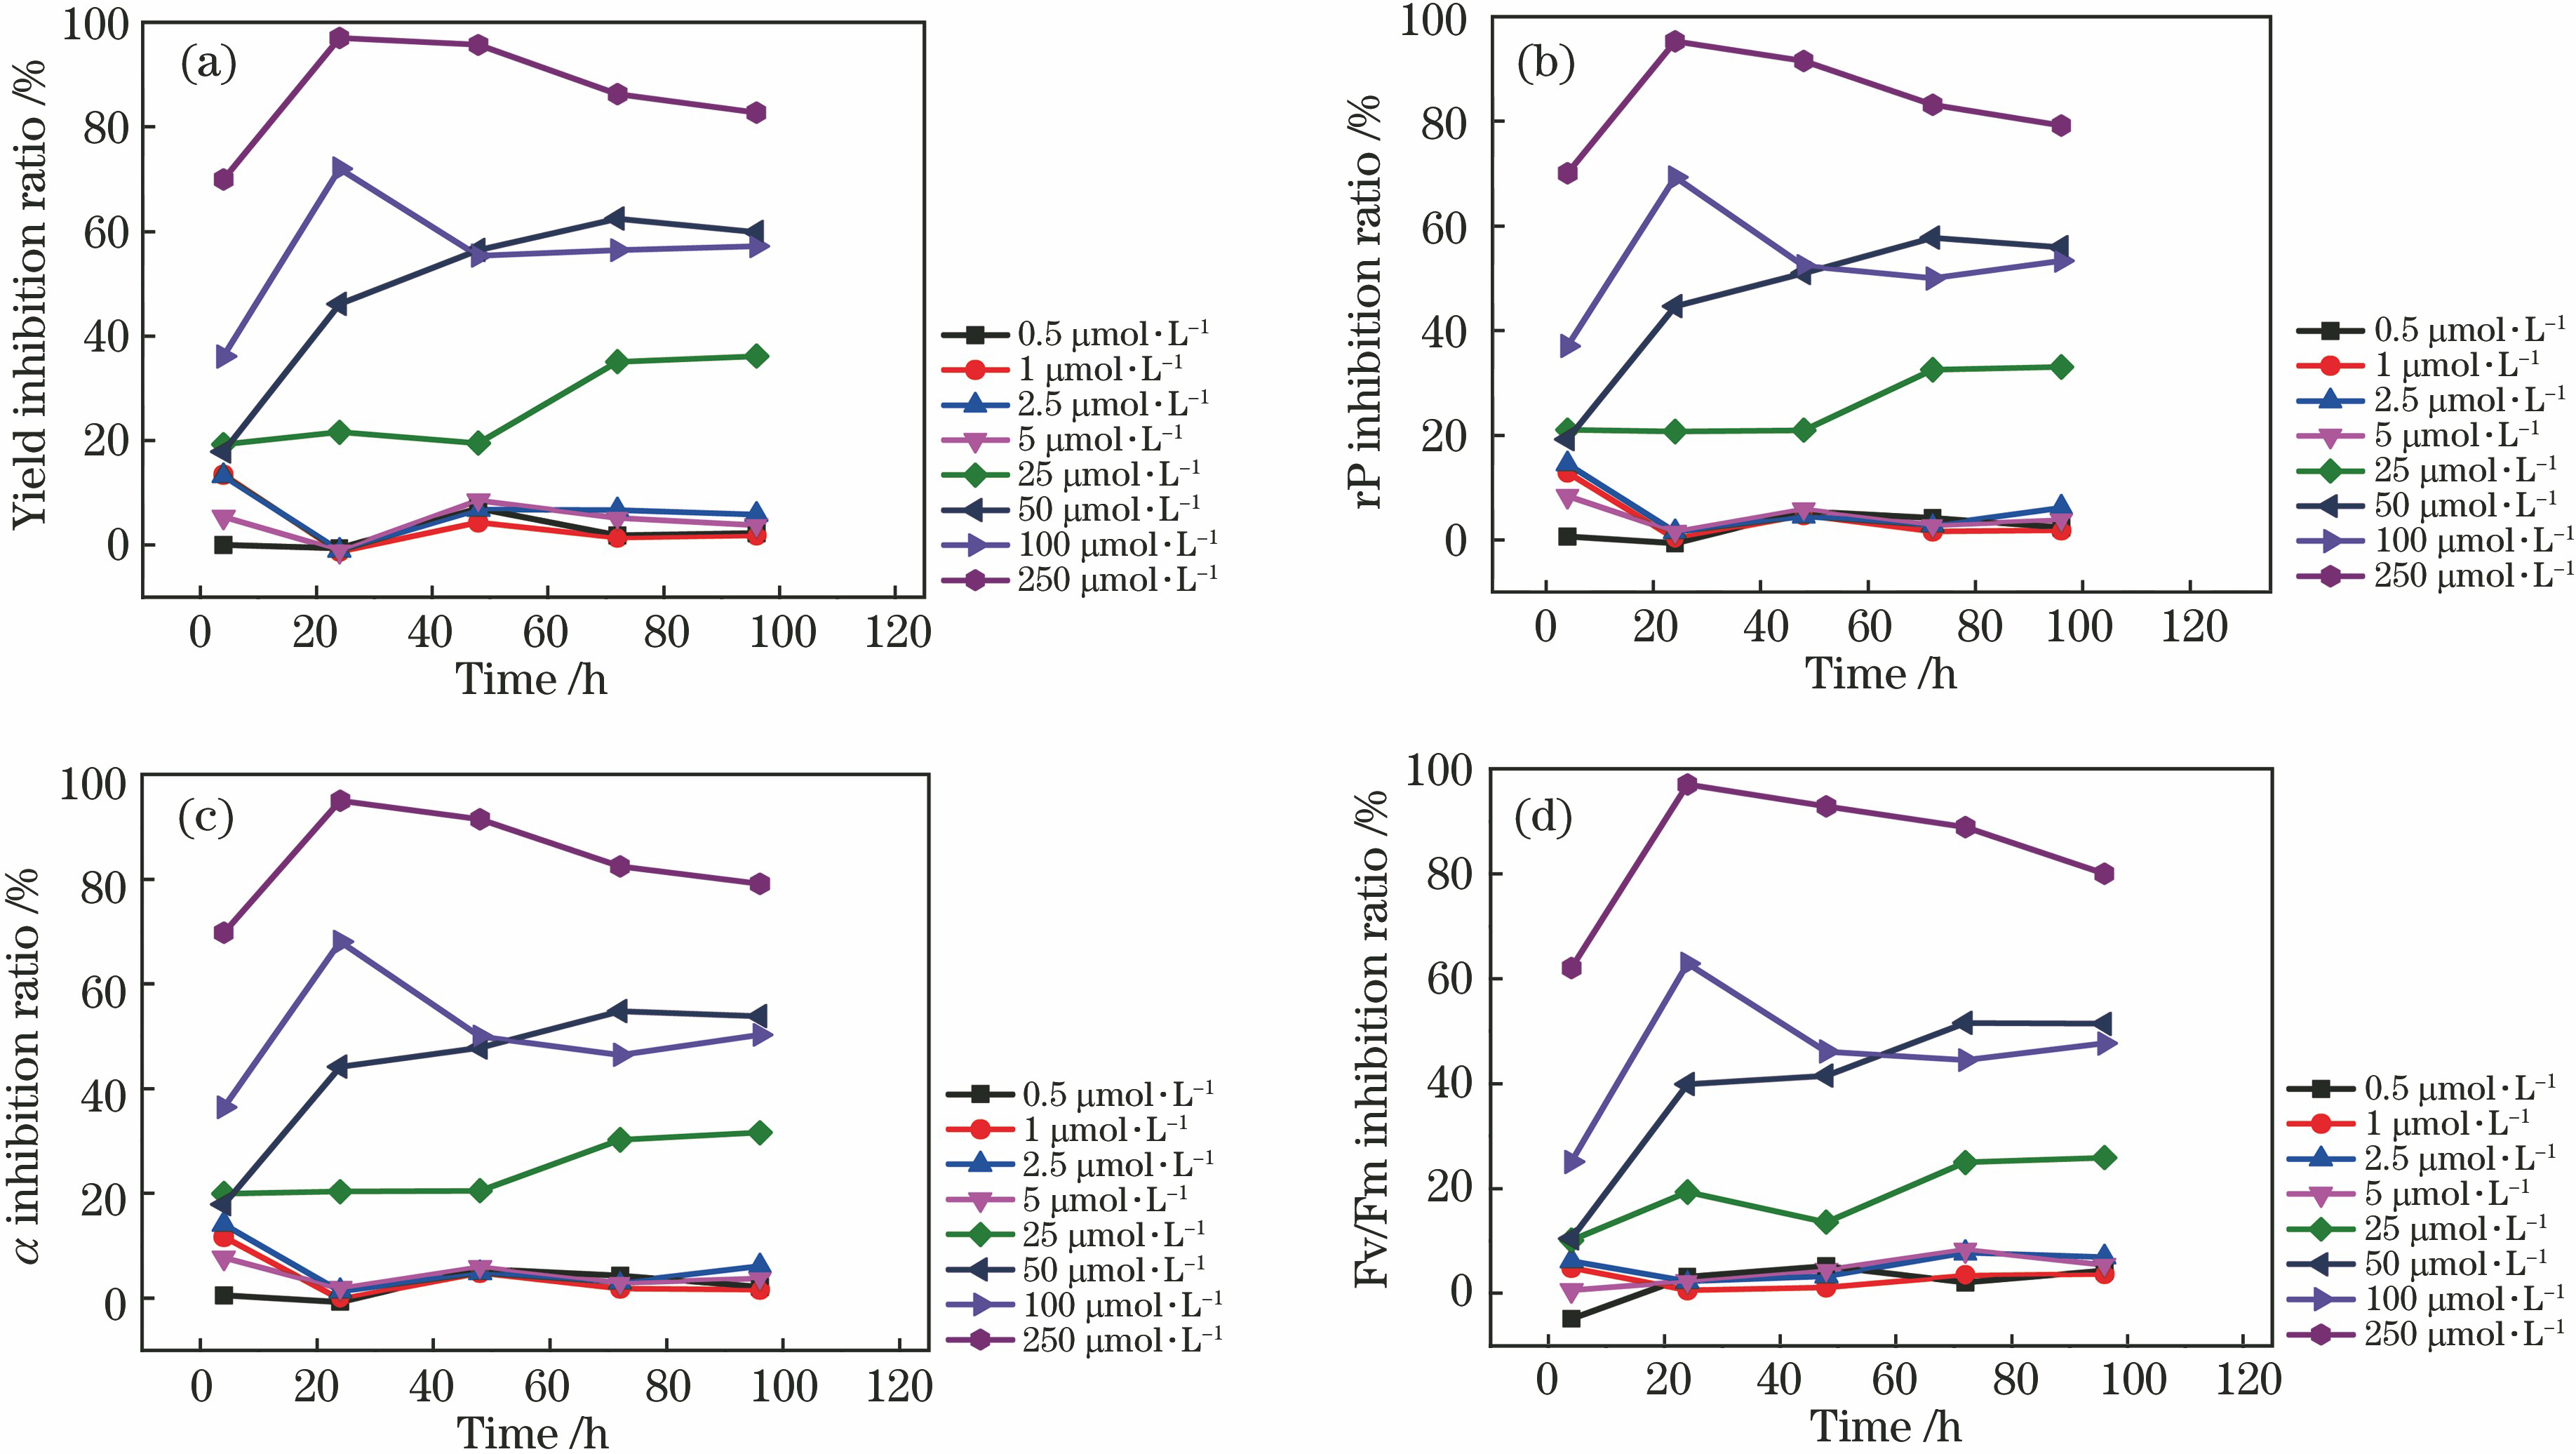 Variation trend of fluorescence parameters with time under different Cu2+ concentrations. (a) Yield; (b) rP; (c)α; (d) Fv/Fm